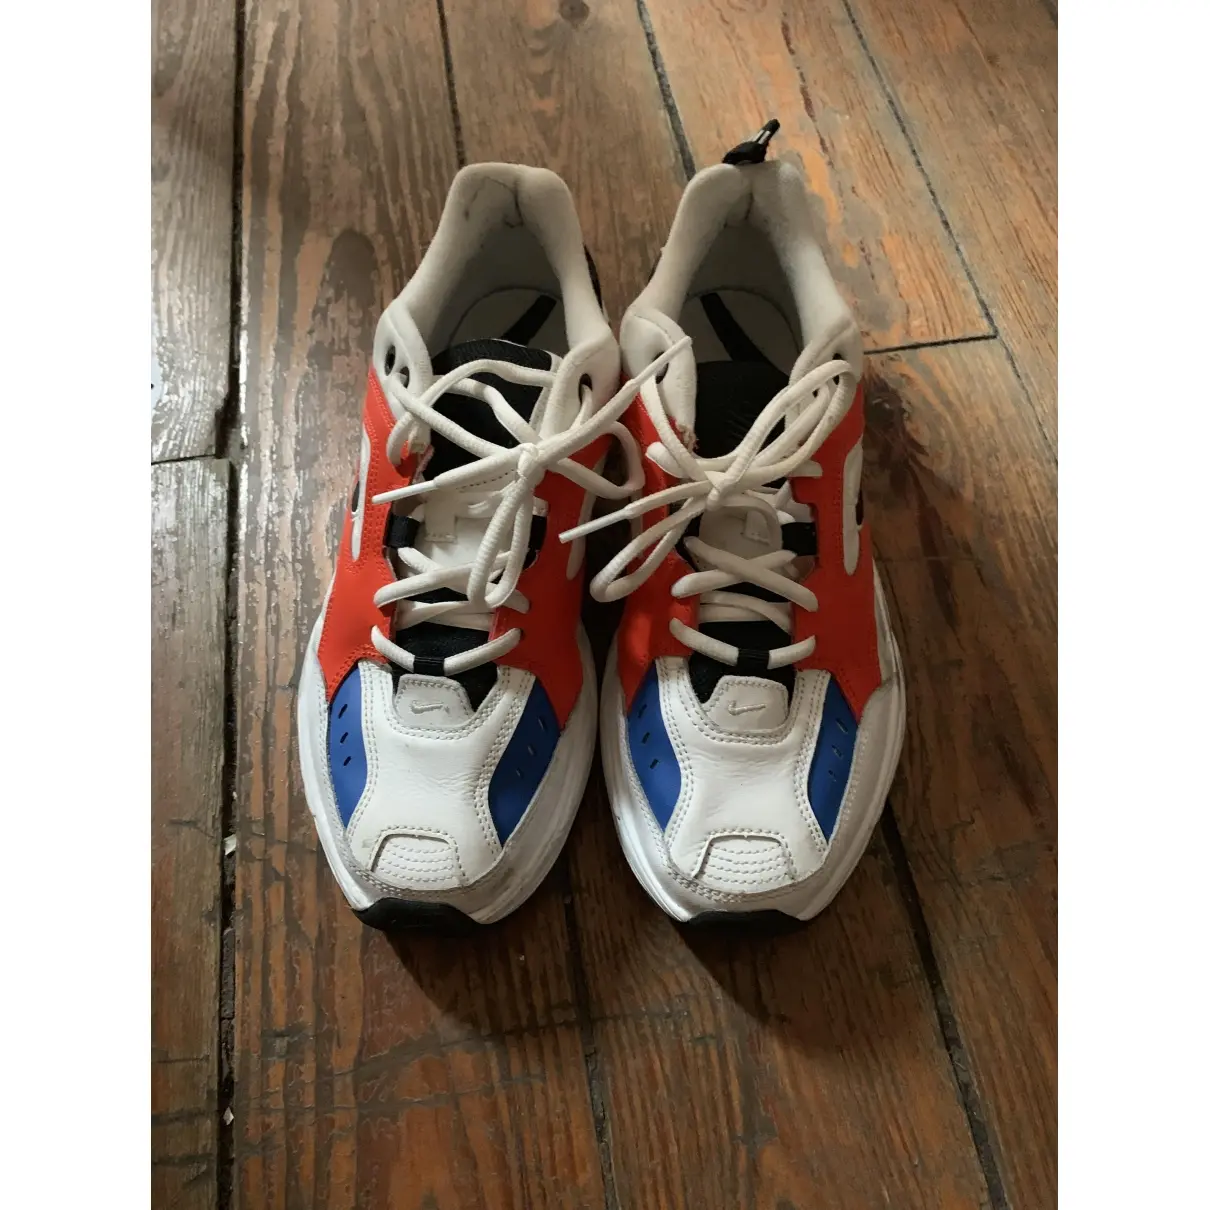 Nike M2K Tekno trainers for sale